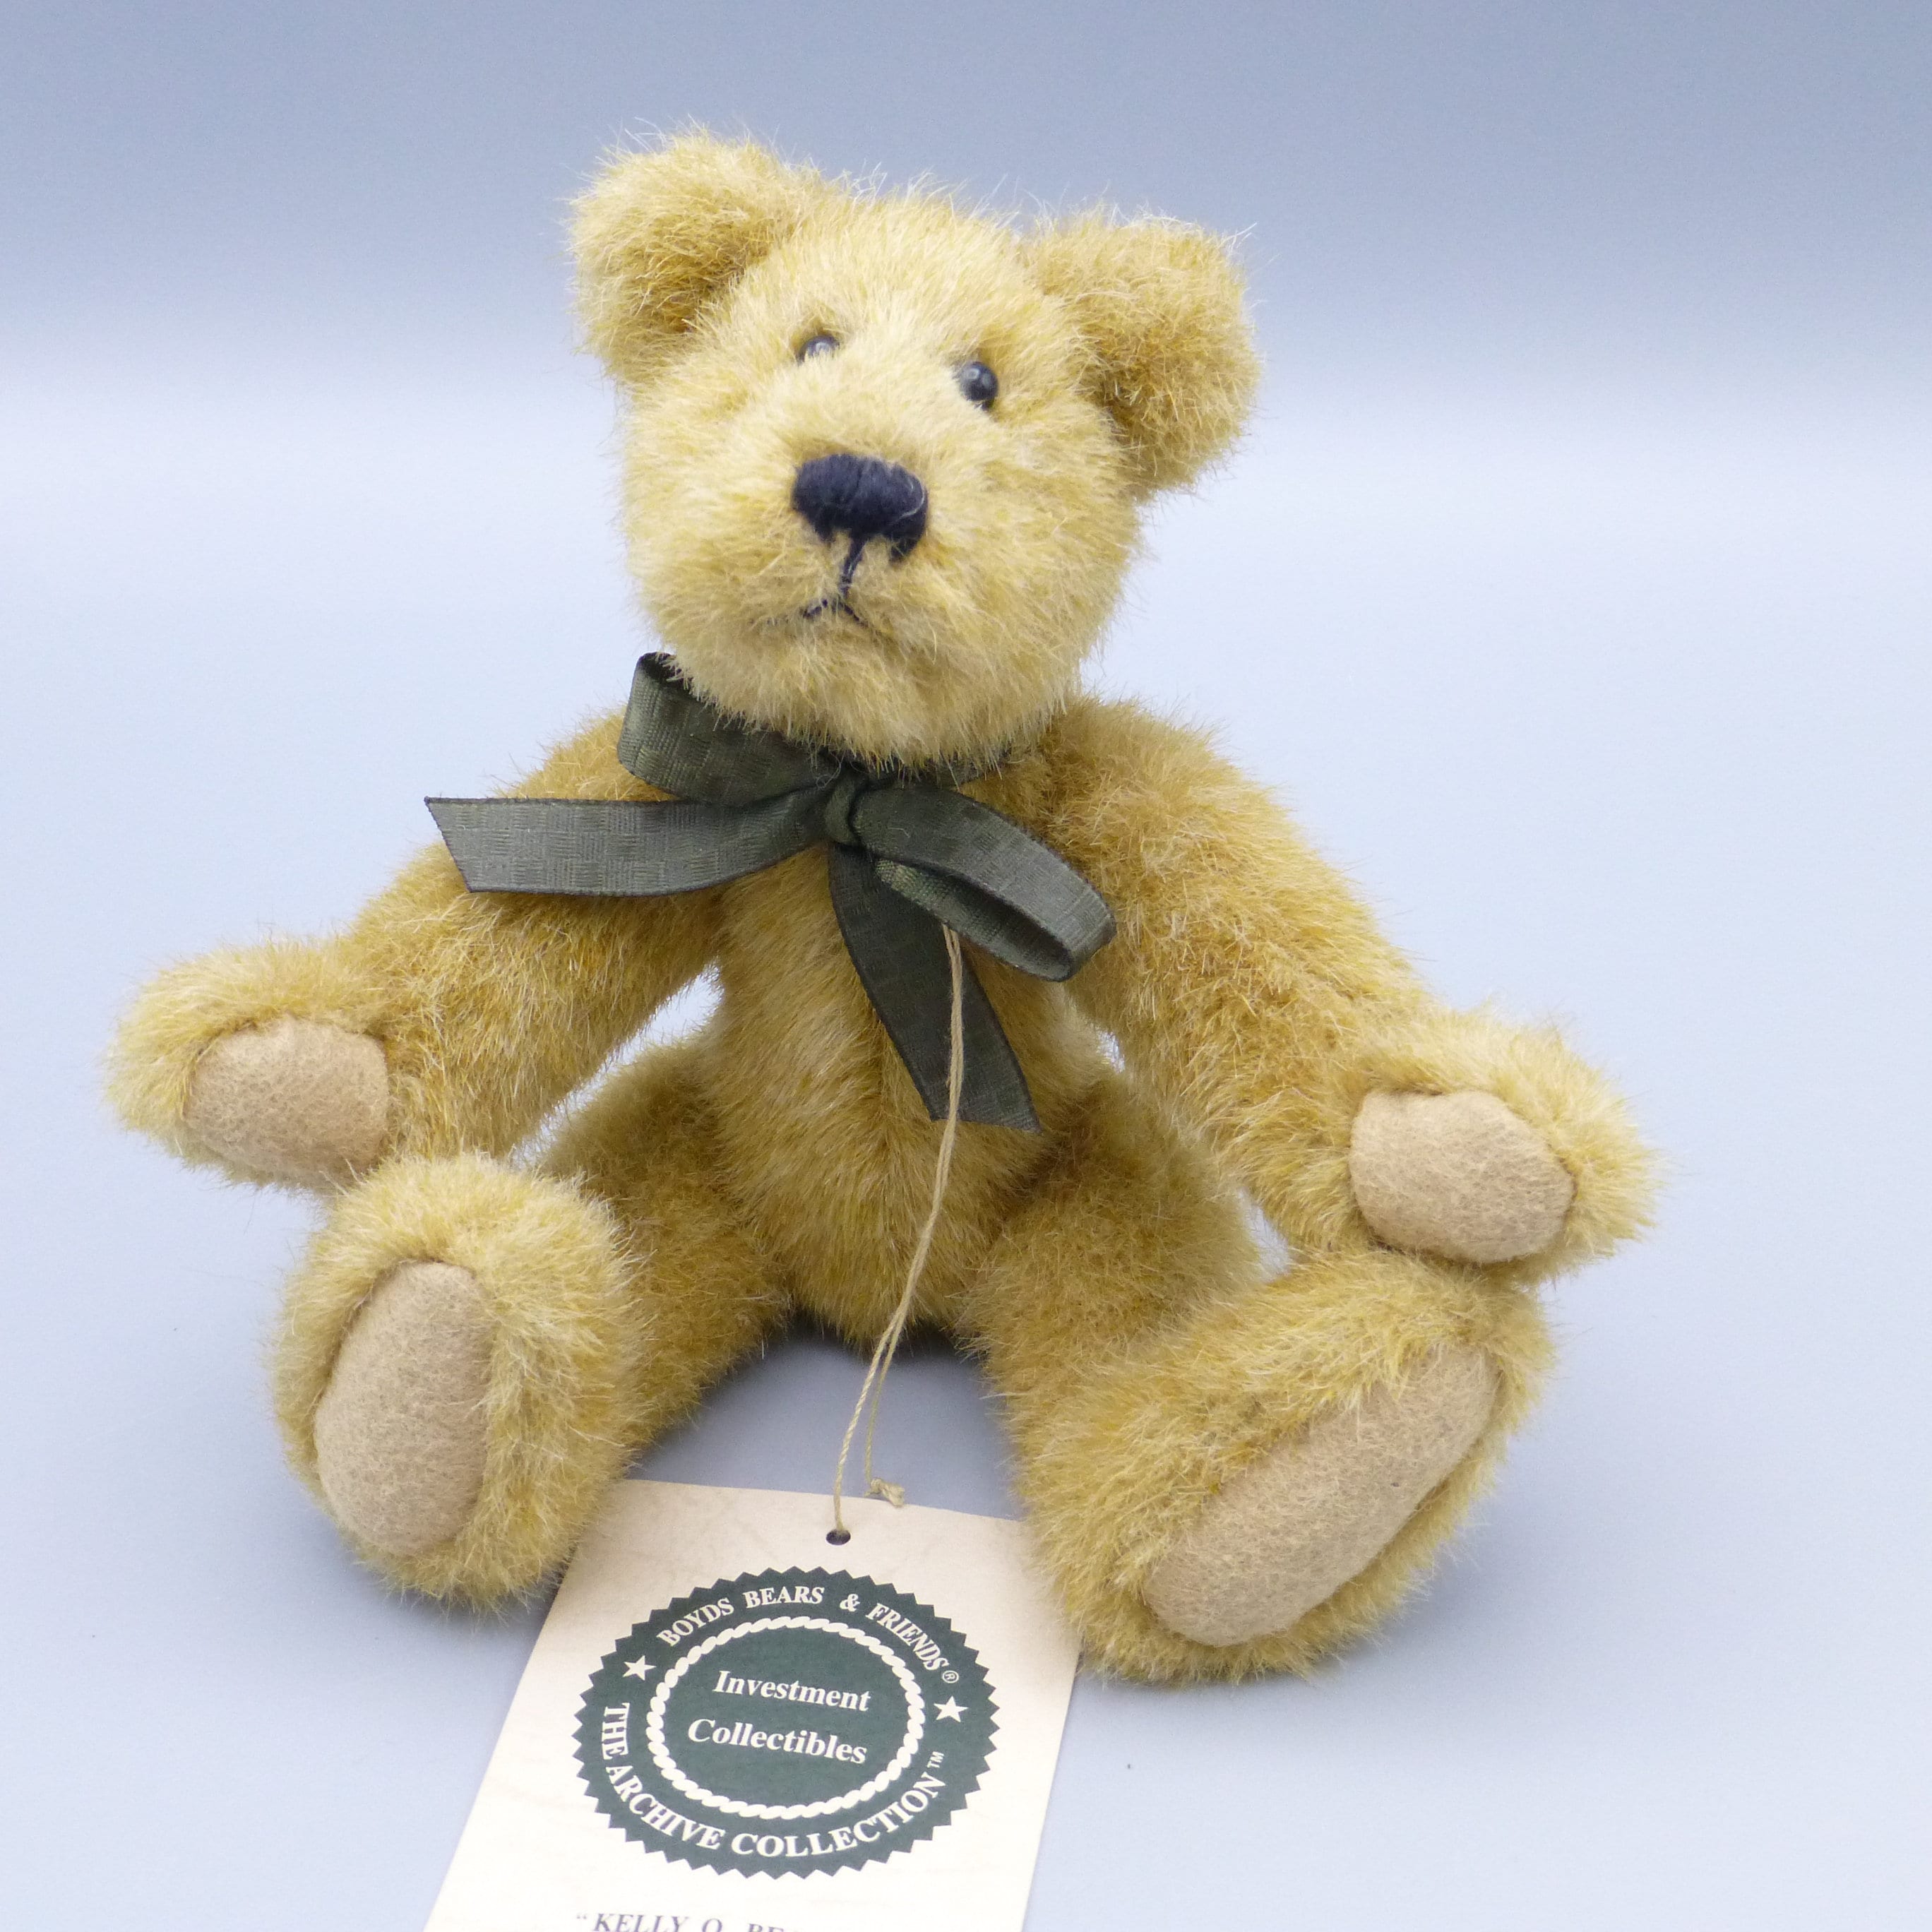 Details about   Boyds Bears Plush KELLY O BEARY Fabric Teddy Bear Jointed 5725208 